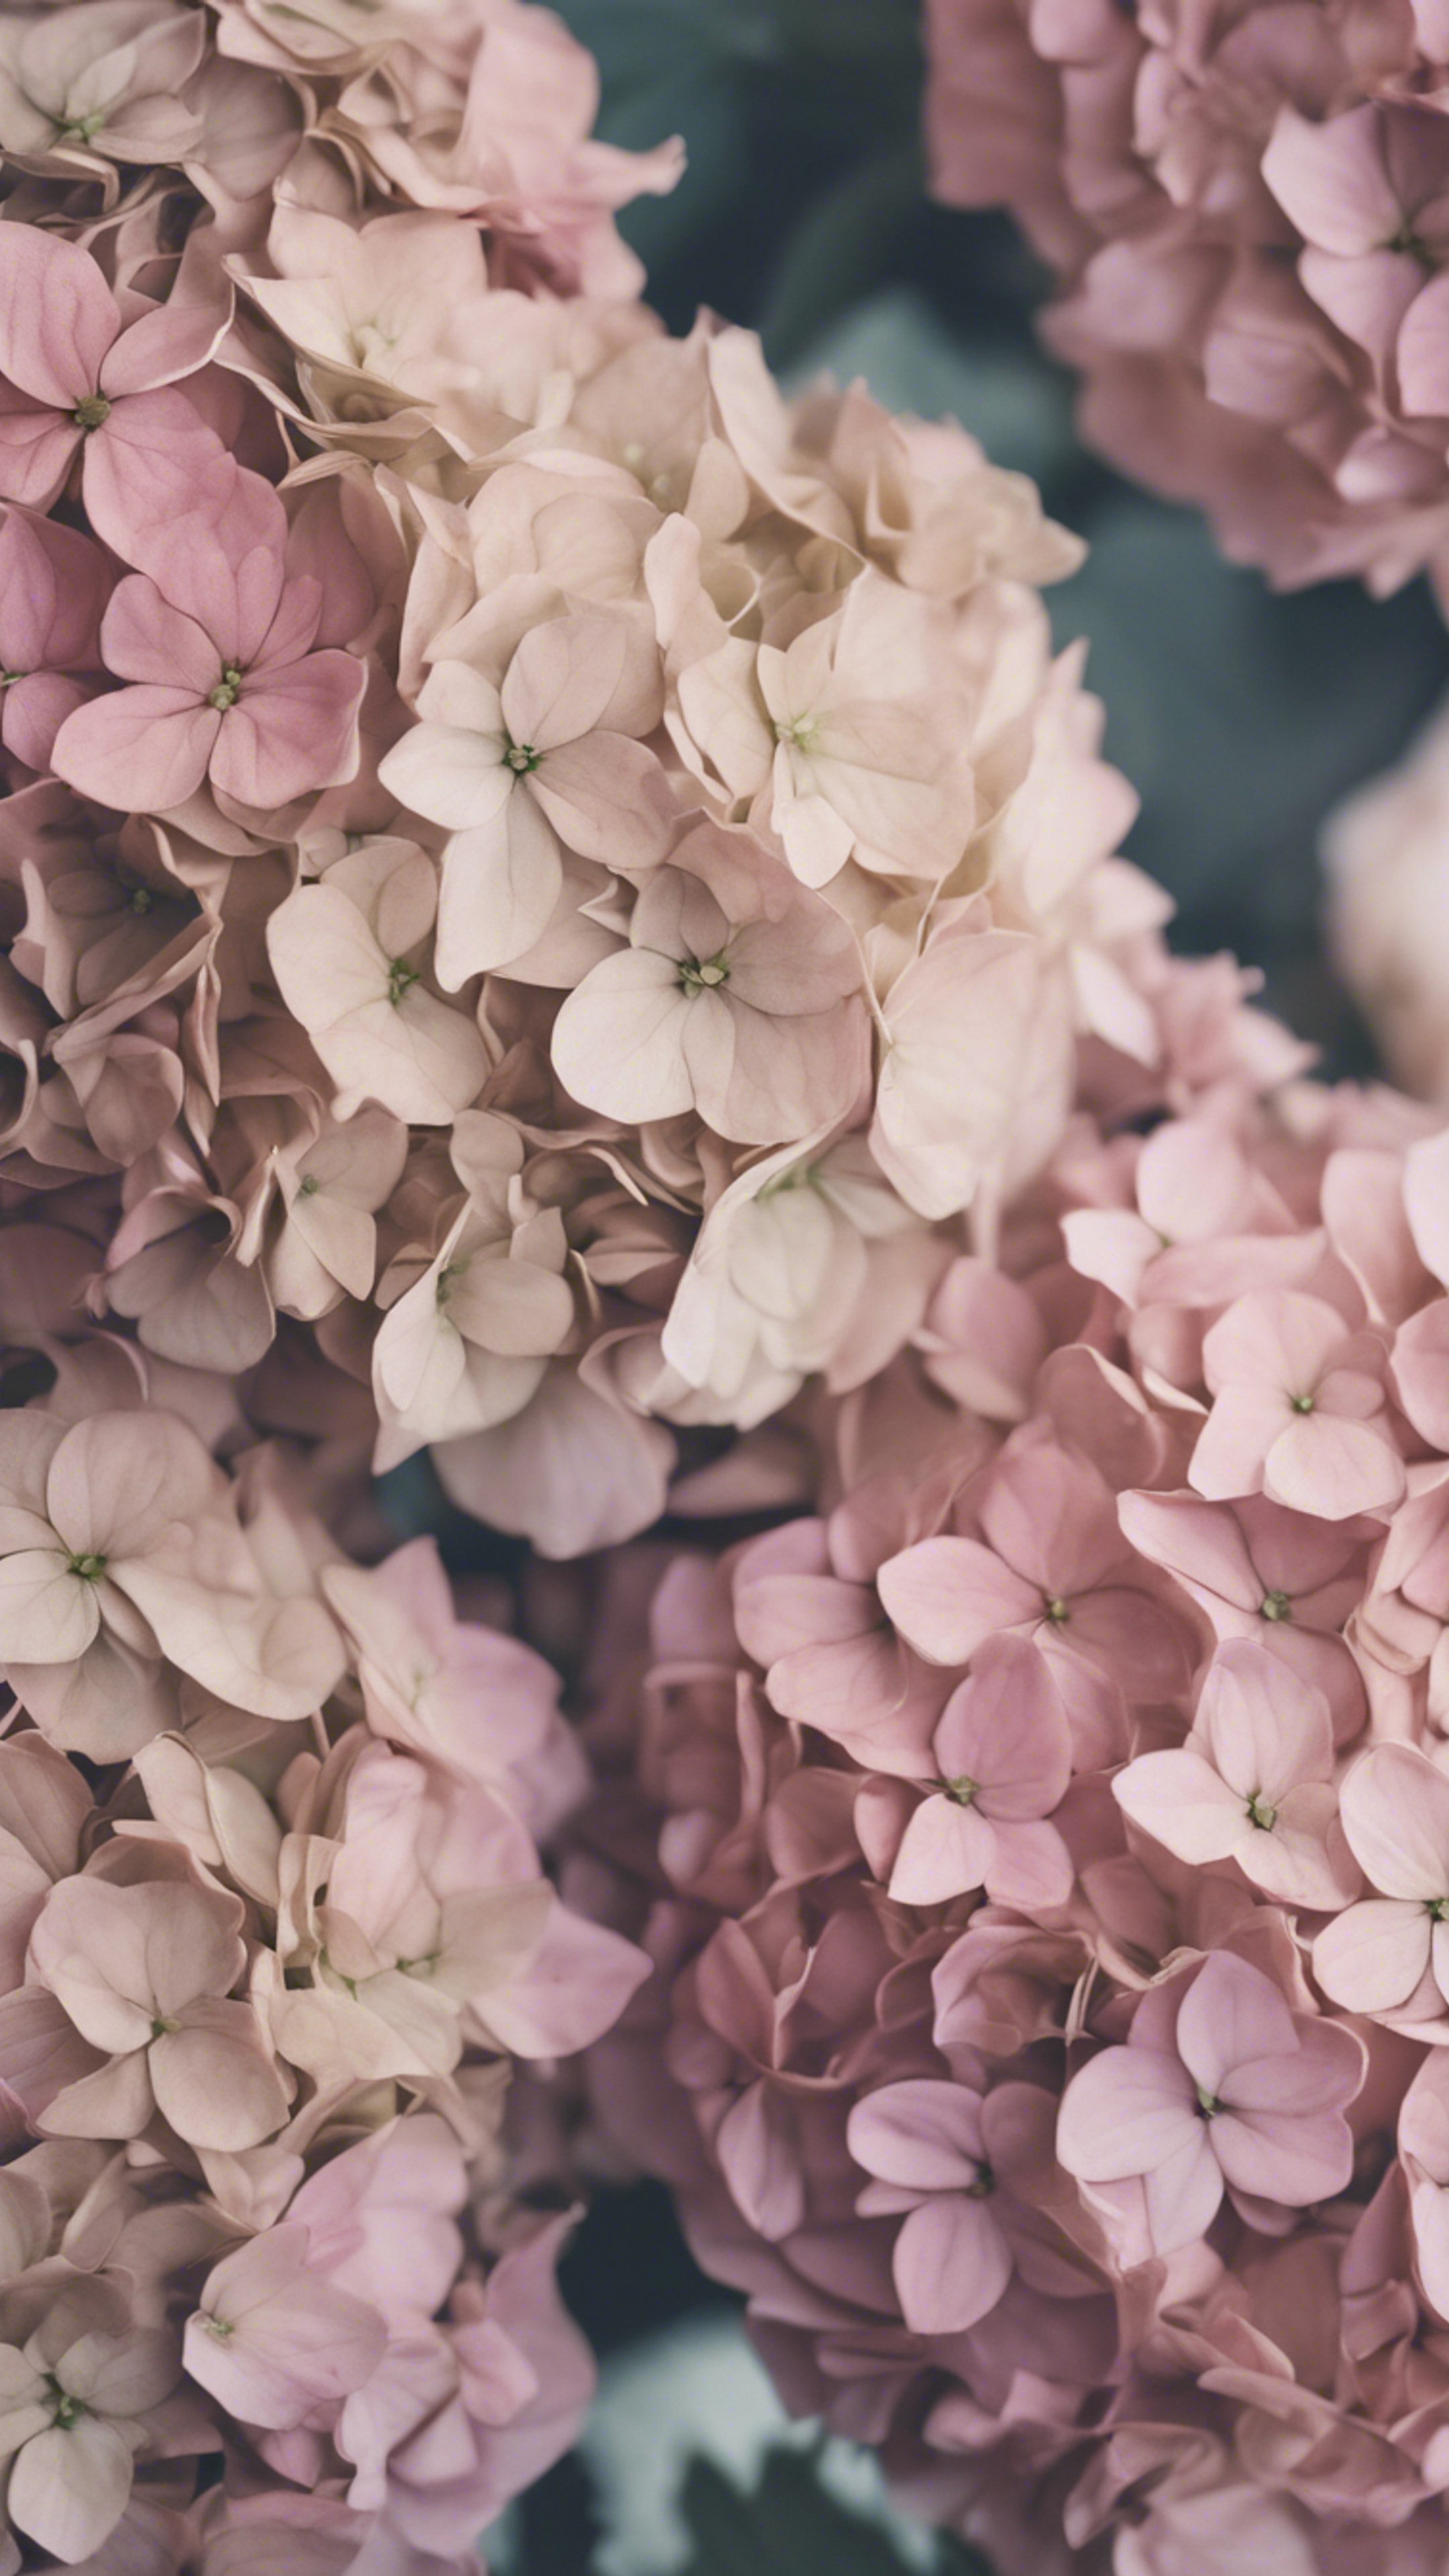 An antique floral pattern with delicate hydrangeas in a hue of vintage pink. Hintergrund[d61dab8ff010416797b3]